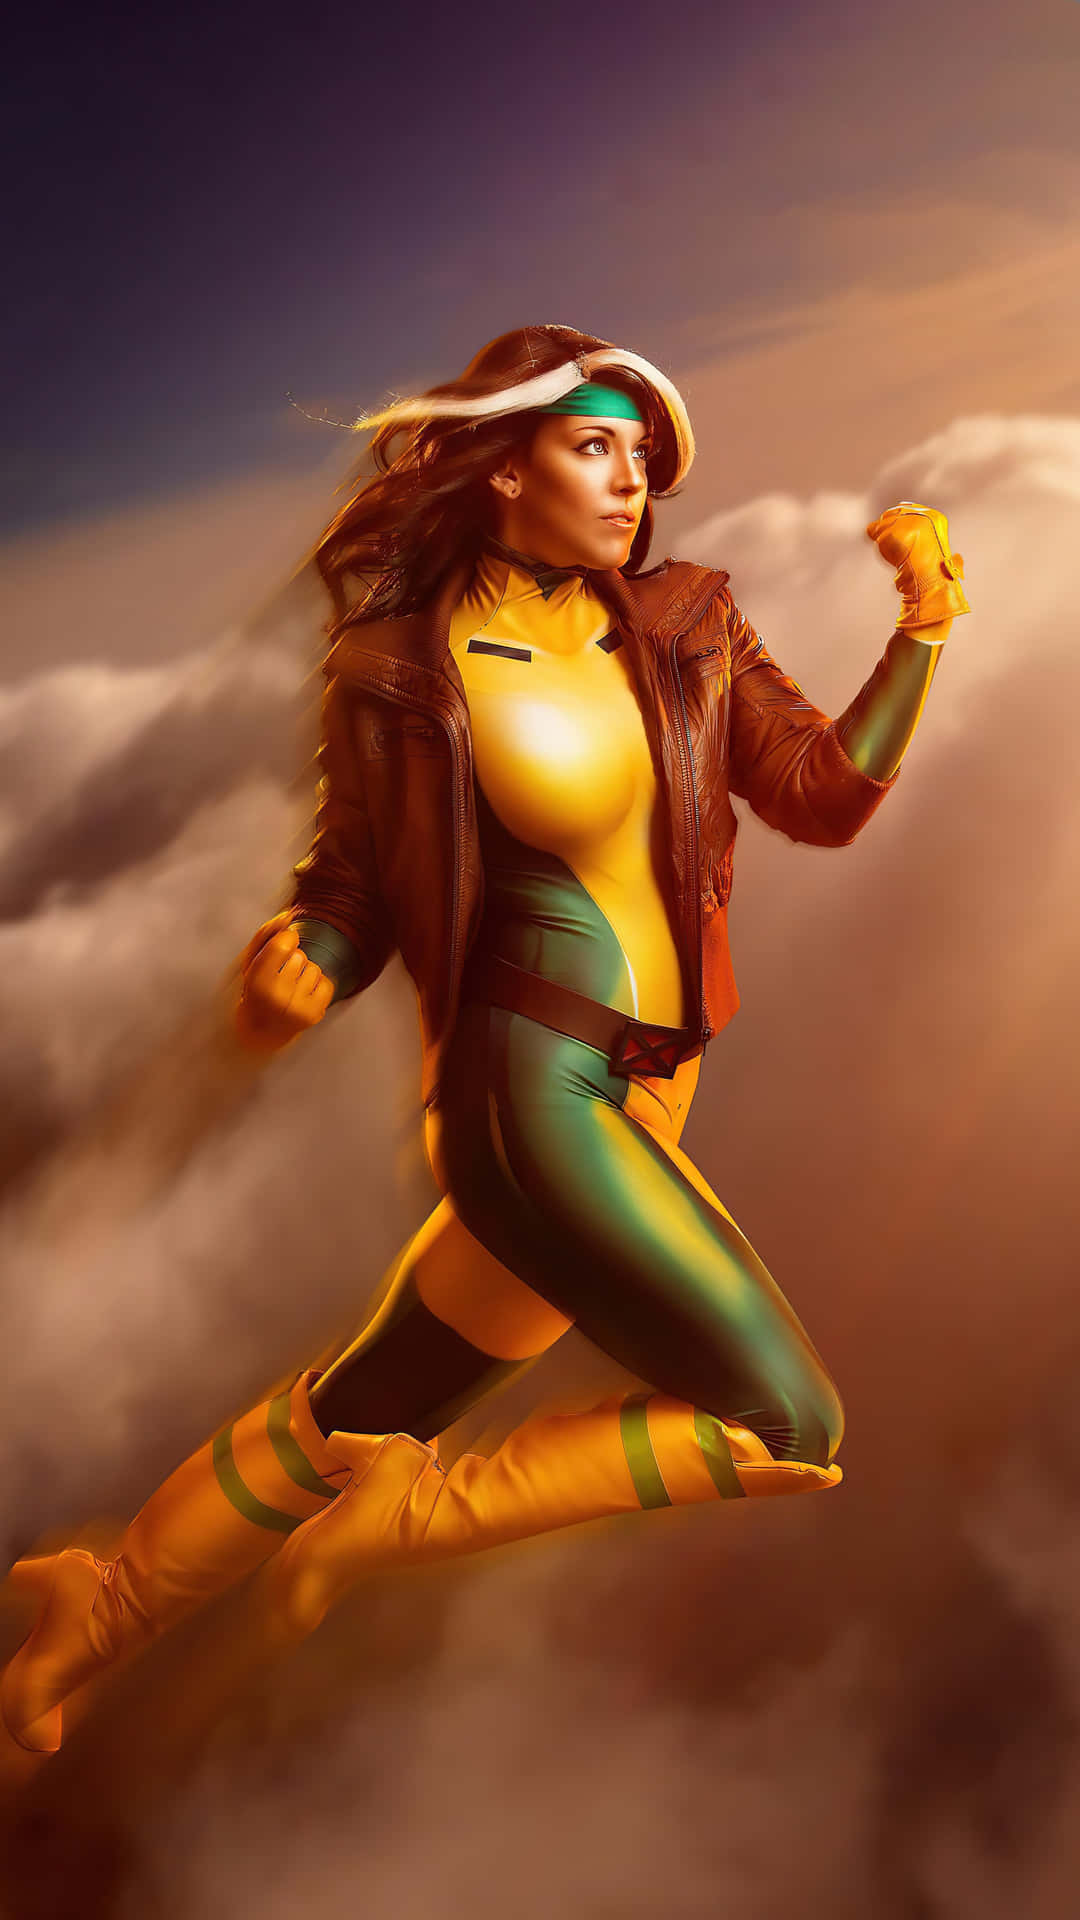 A Woman In A Yellow And Green Costume Flying Through The Clouds